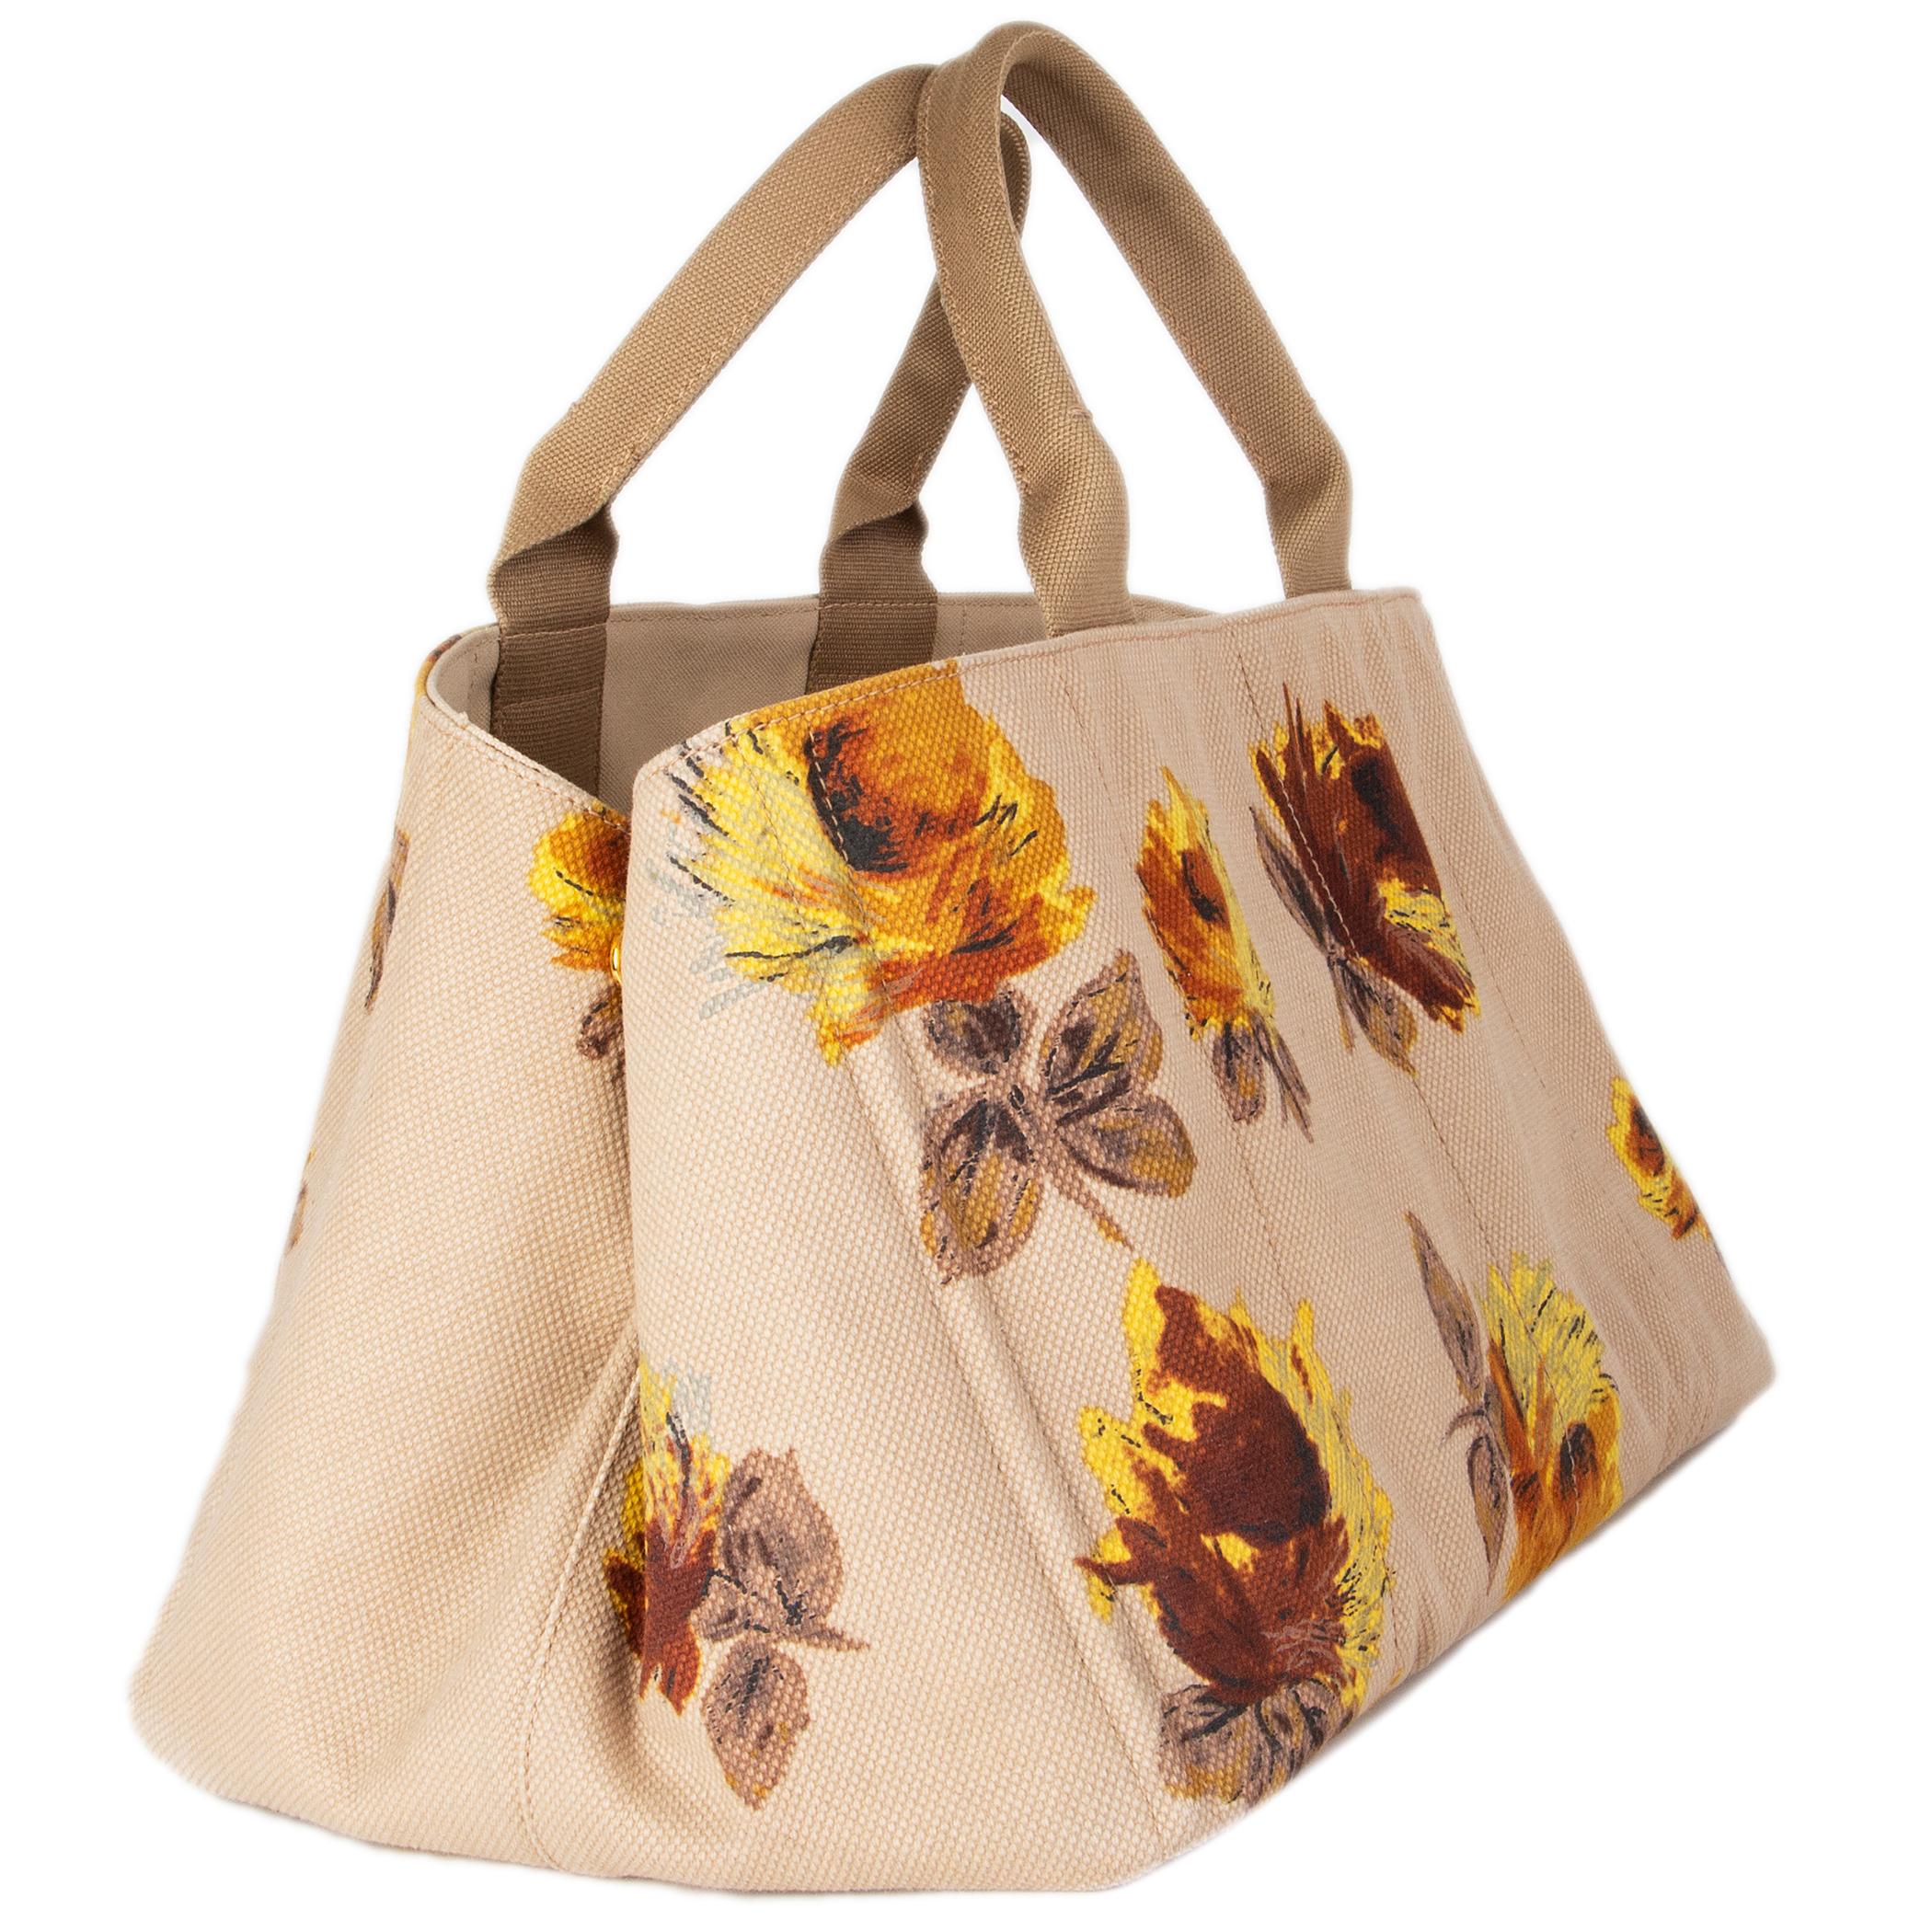 Prada 'Canapa Large' tote in beige canvas with rust brown and yellow floral-print. Lined in beige canvas with a zipper pocket against the front and a zipper and open pocket against the back. Has been carried and is in excellent condition.

Height